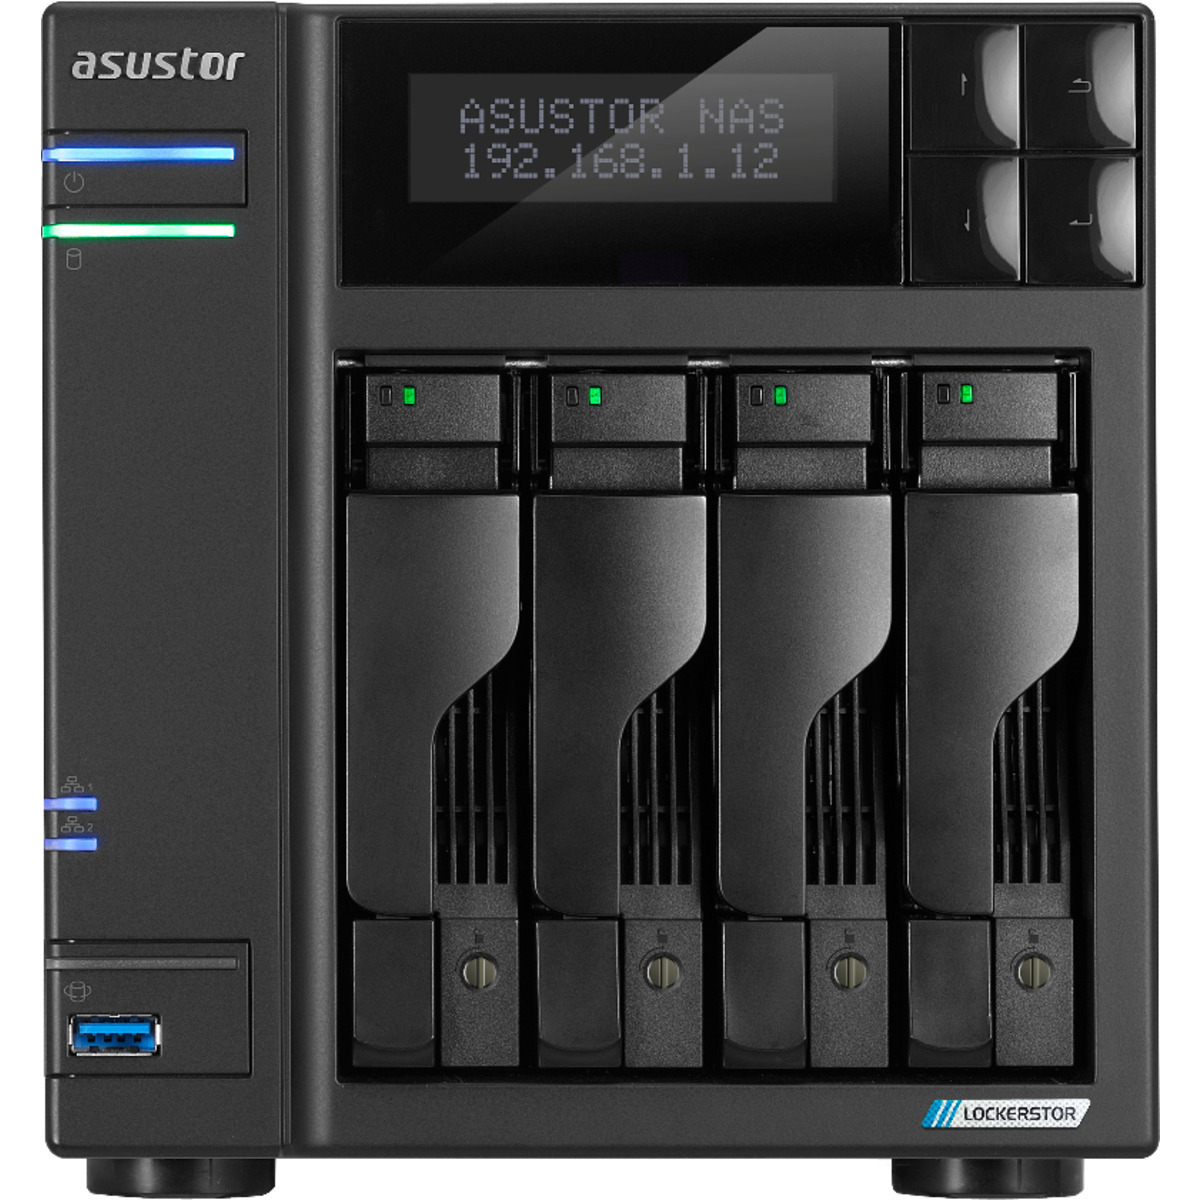 ASUSTOR LOCKERSTOR 4 Gen2 AS6704T 18tb 4-Bay Desktop Multimedia / Power User / Business NAS - Network Attached Storage Device 3x6tb Seagate IronWolf ST6000VN006 3.5 5400rpm SATA 6Gb/s HDD NAS Class Drives Installed - Burn-In Tested - FREE RAM UPGRADE LOCKERSTOR 4 Gen2 AS6704T